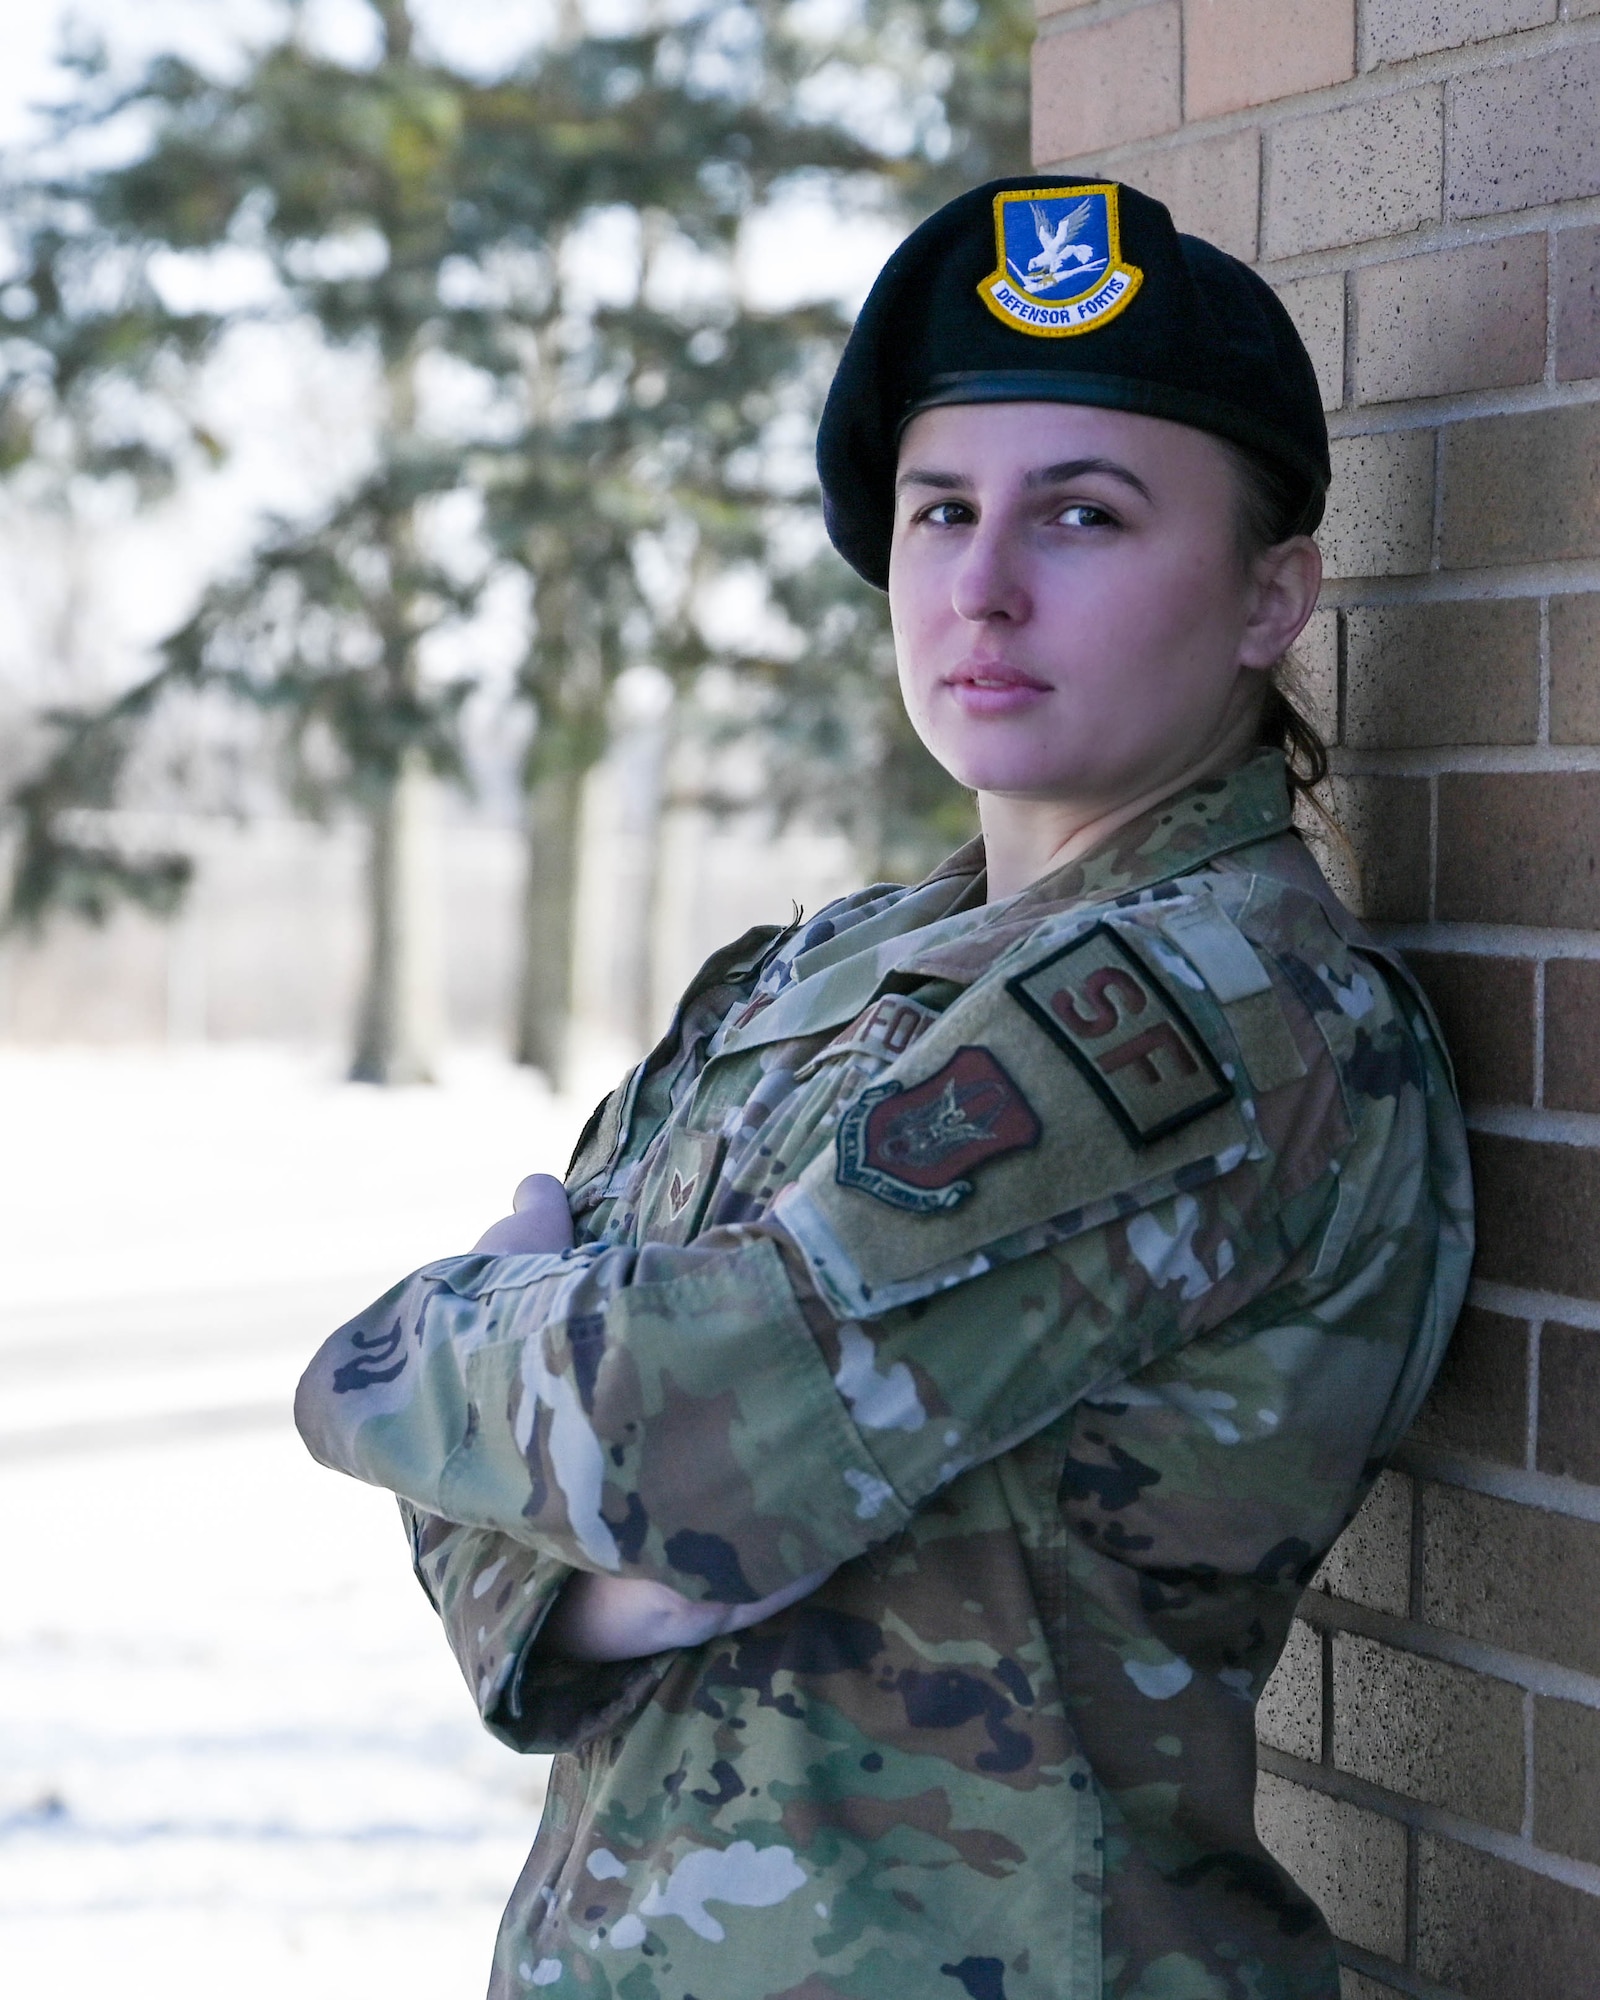 Senior Airman Viktoria Senkiv, a fireteam member assigned to the 910th Security Forces Squadron, poses for a photo outside Youngstown Air Reserve Station’s Combat Arms Training and Maintenance firing range, Jan. 8, 2022.